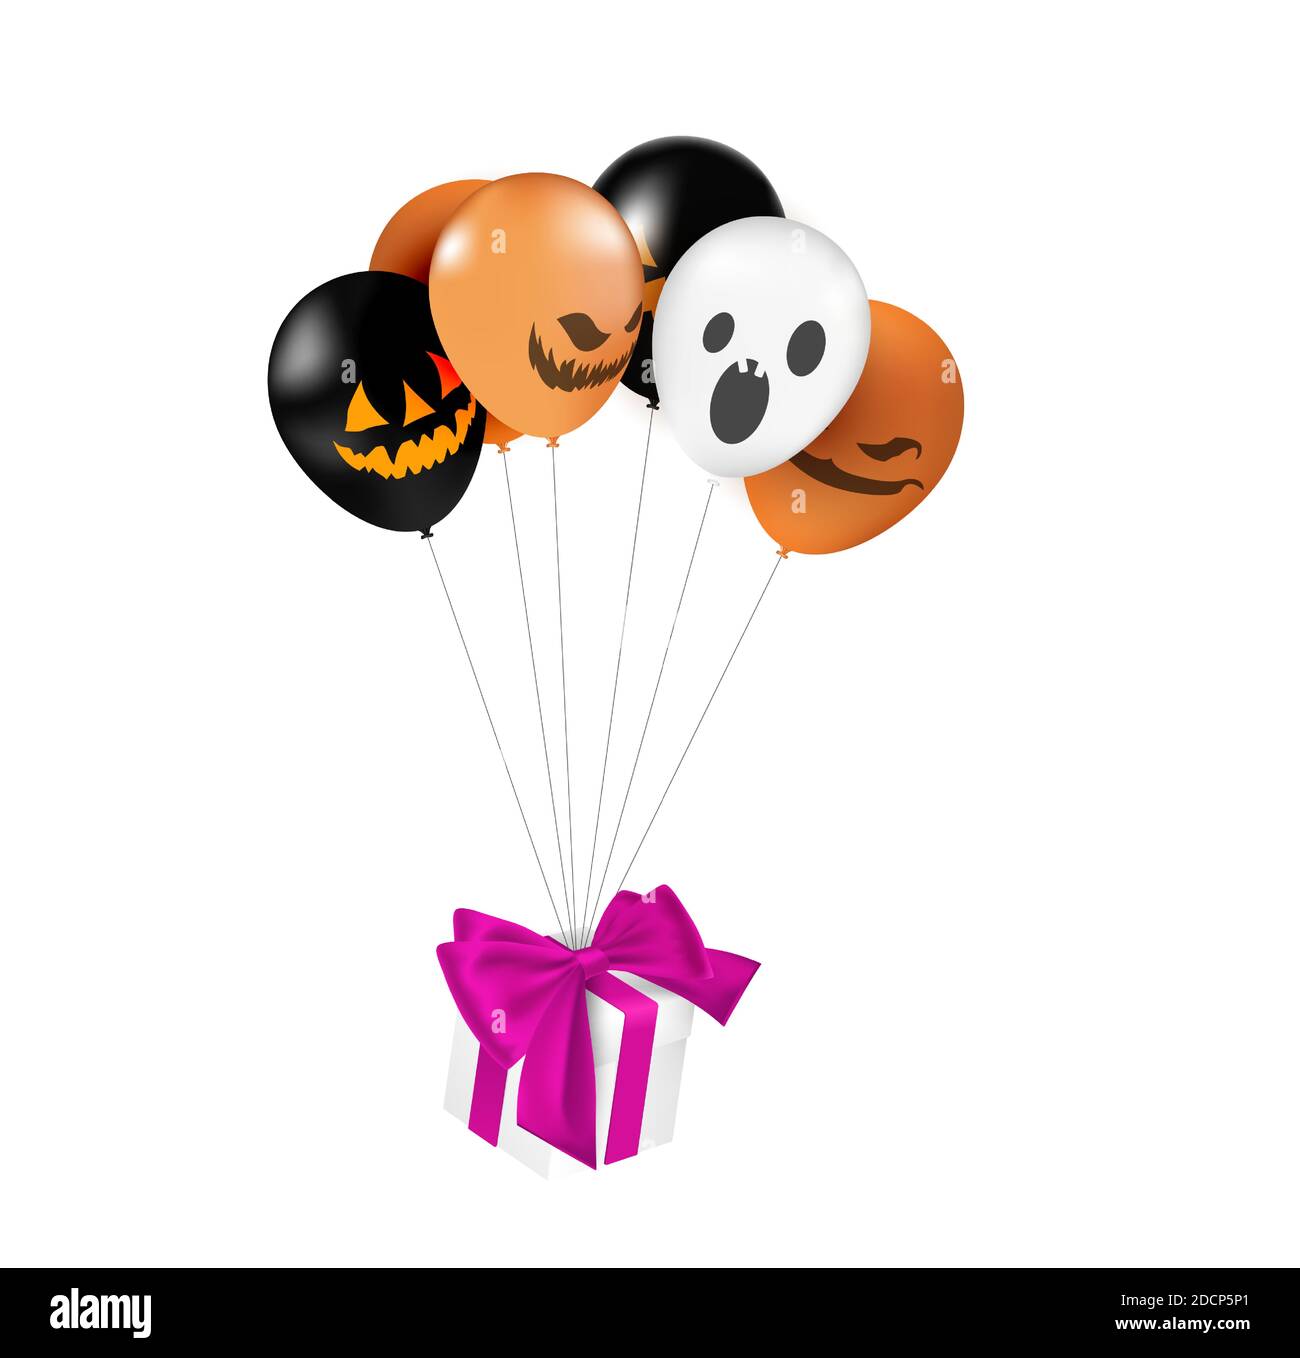 Halloween card with balloons helium and gifts. Vector illustration of Halloween balloon and gift box. Stock Vector